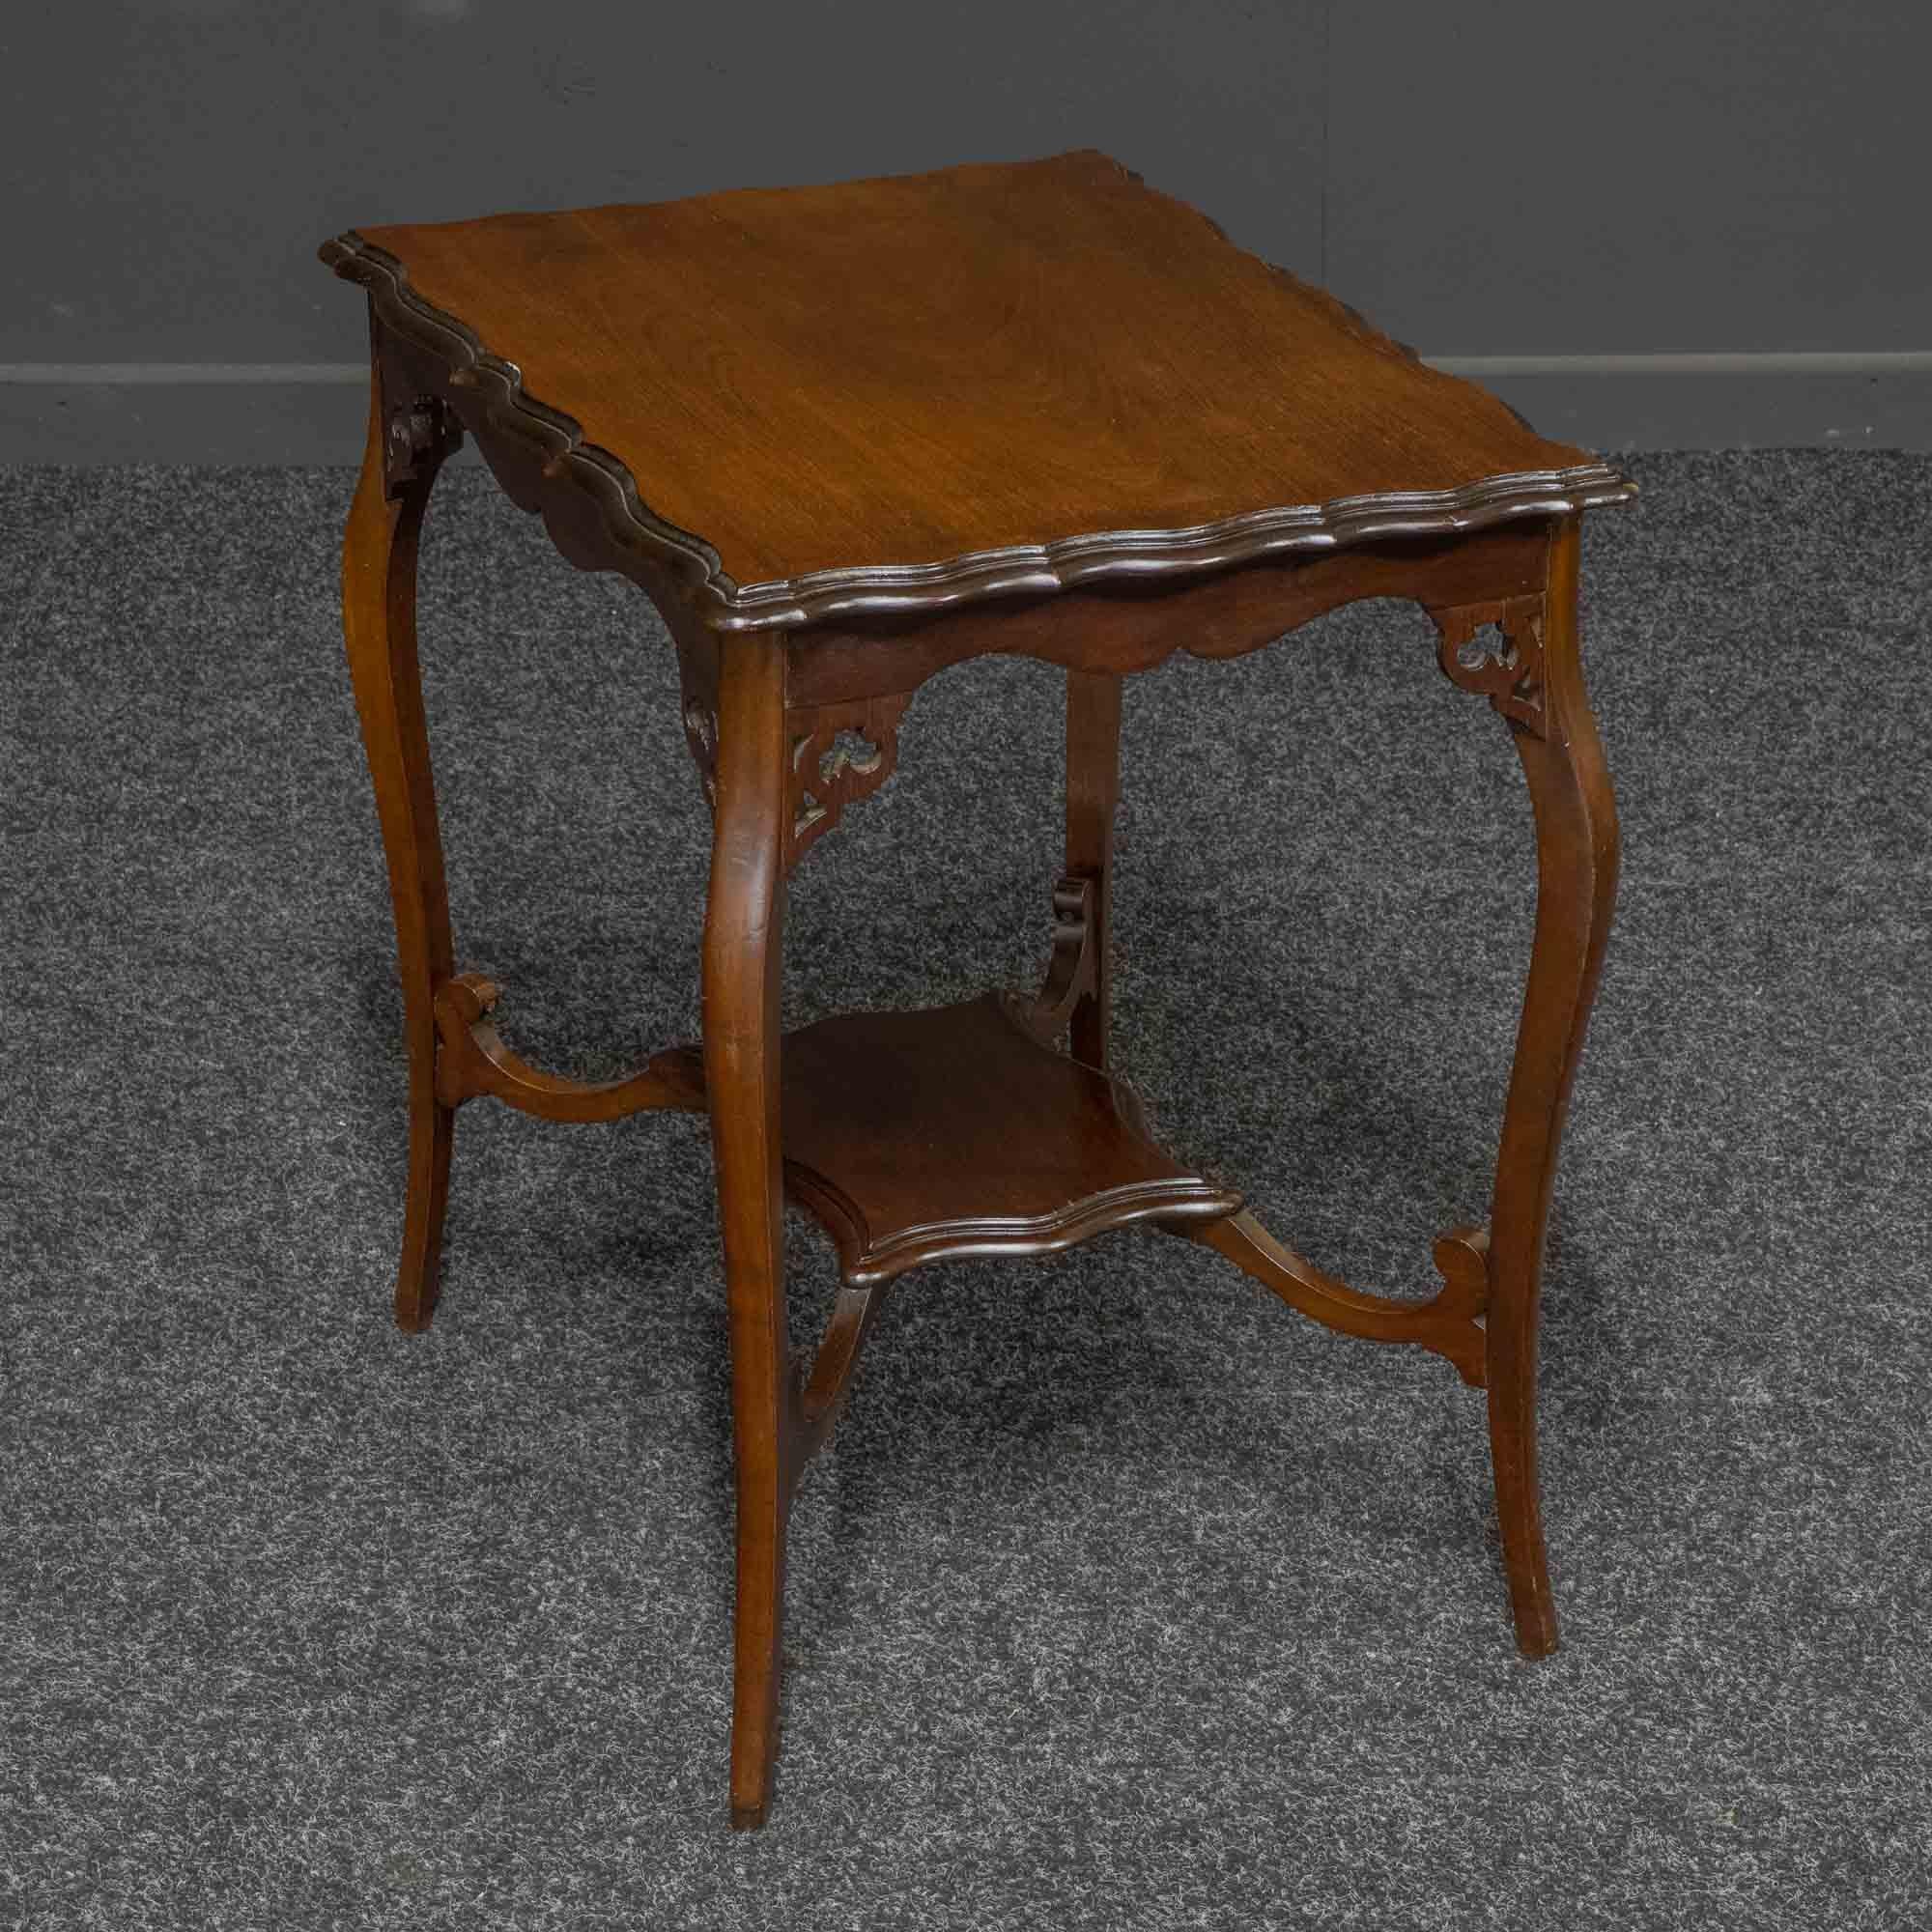 Edwardian Mahogany Window Table In Good Condition For Sale In Manchester, GB